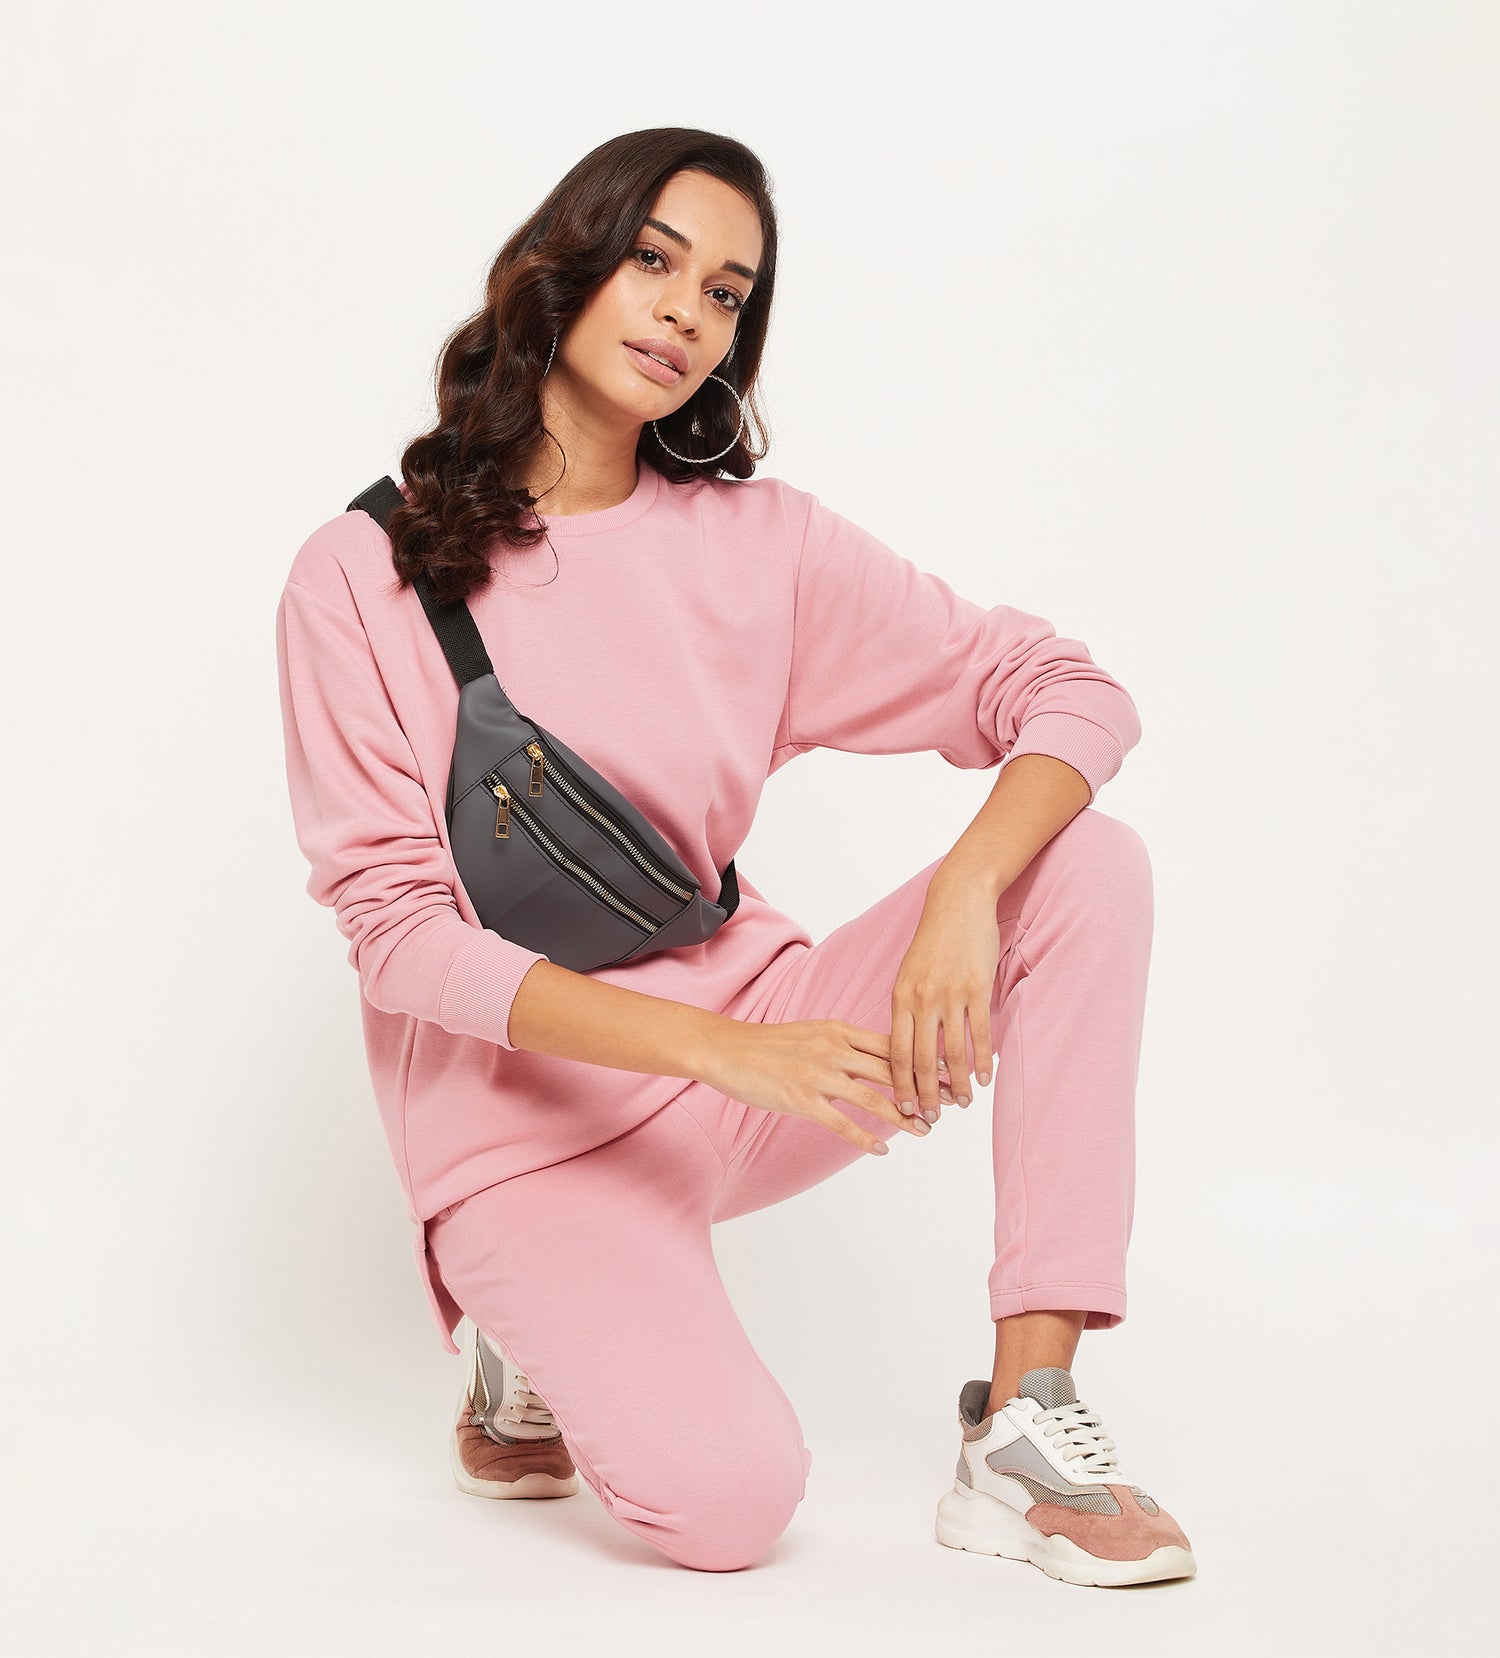 Women Pink Relaxed Fit Crew Neck All Season Tracksuit